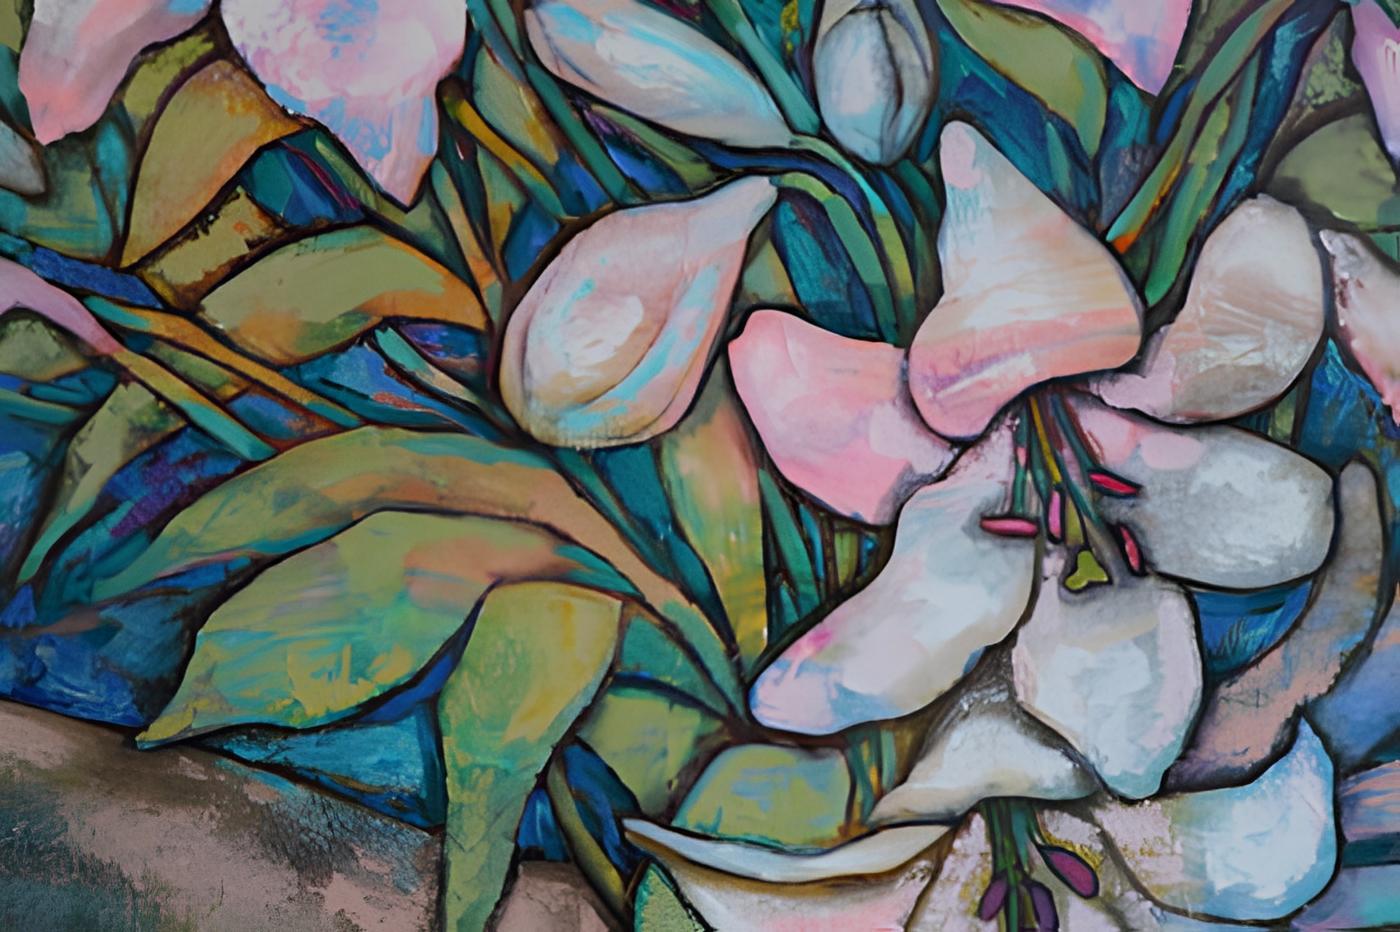 In this expressive piece, I've layered acrylics to capture the delicate interplay of light and color among the blooms. My emotions flow through the brushstrokes, evoking growth and resilience. The marriage of fine art and an organic aesthetic gives